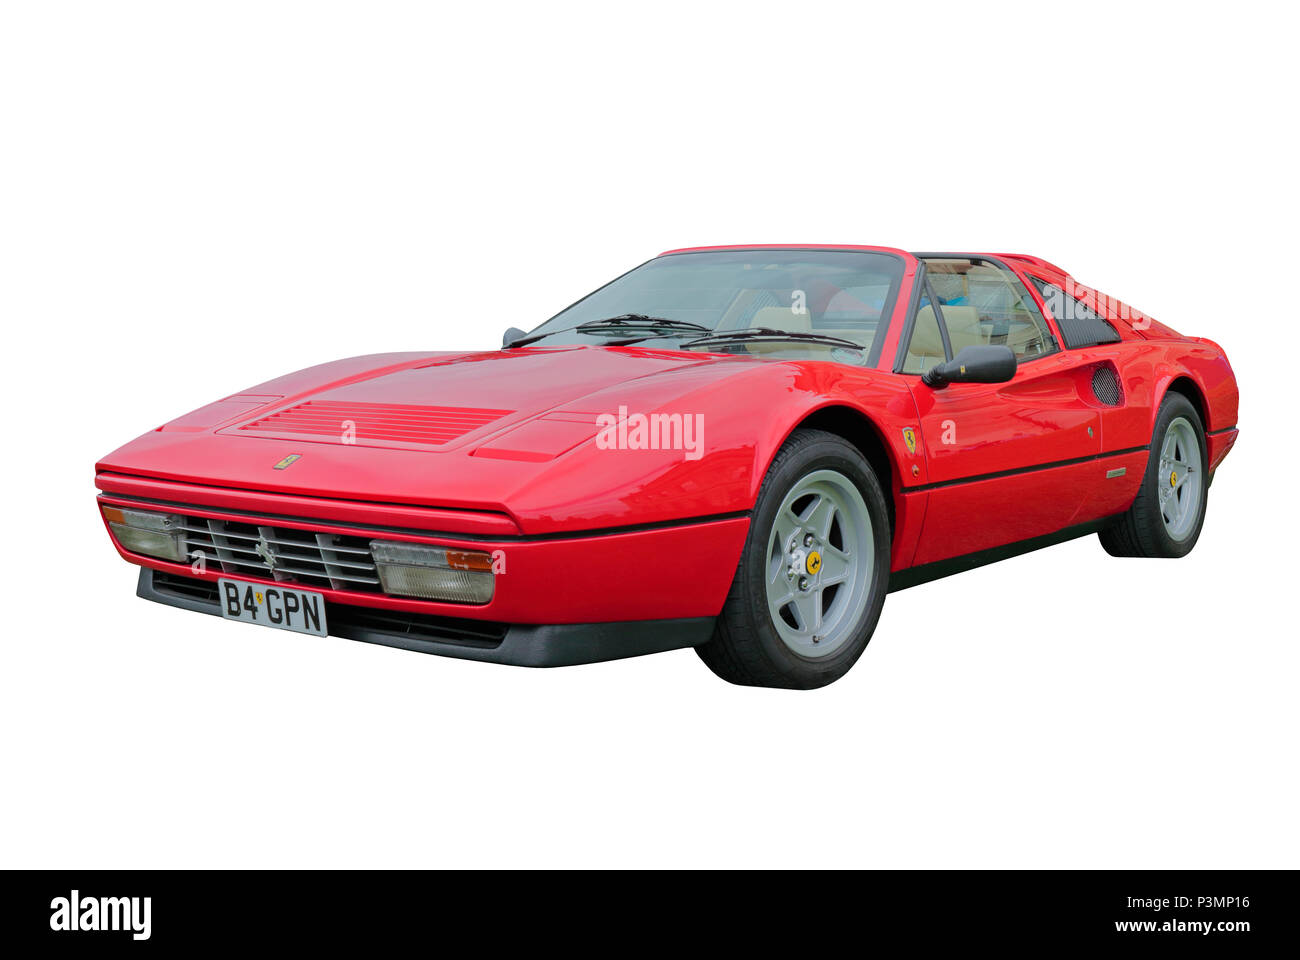 A red Ferrari 328 GTS isolated on a white background Stock Photo